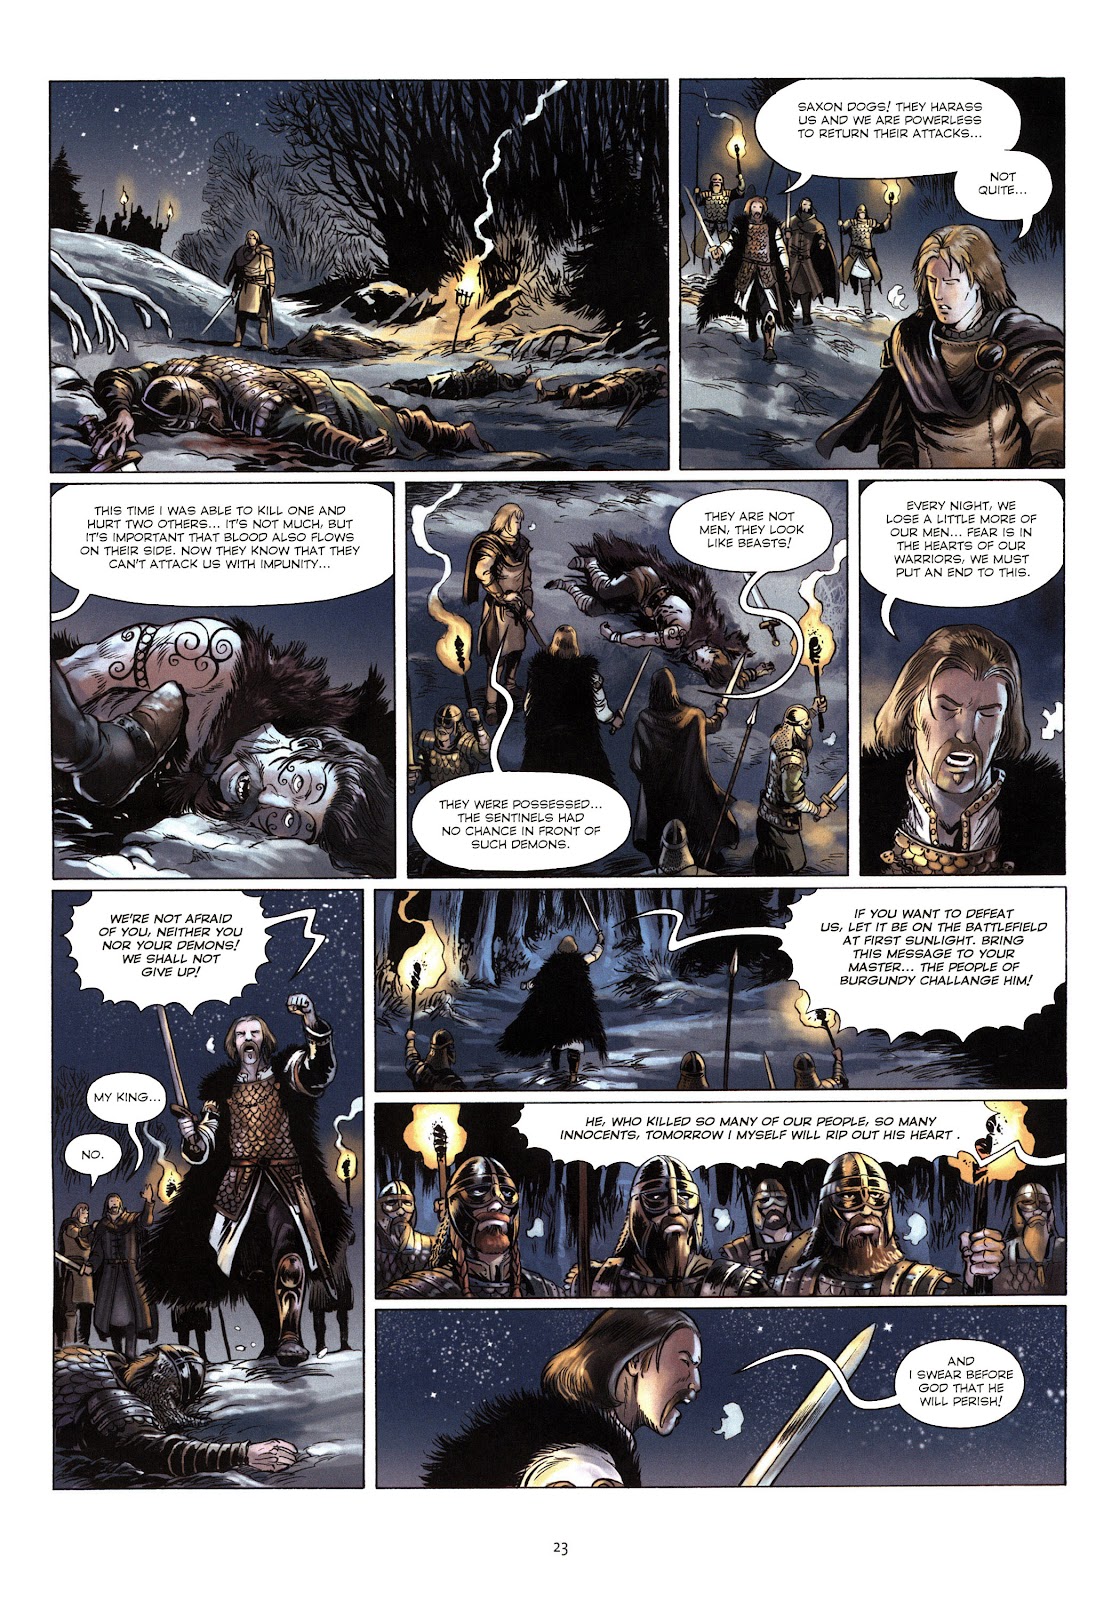 Twilight of the God issue 5 - Page 24